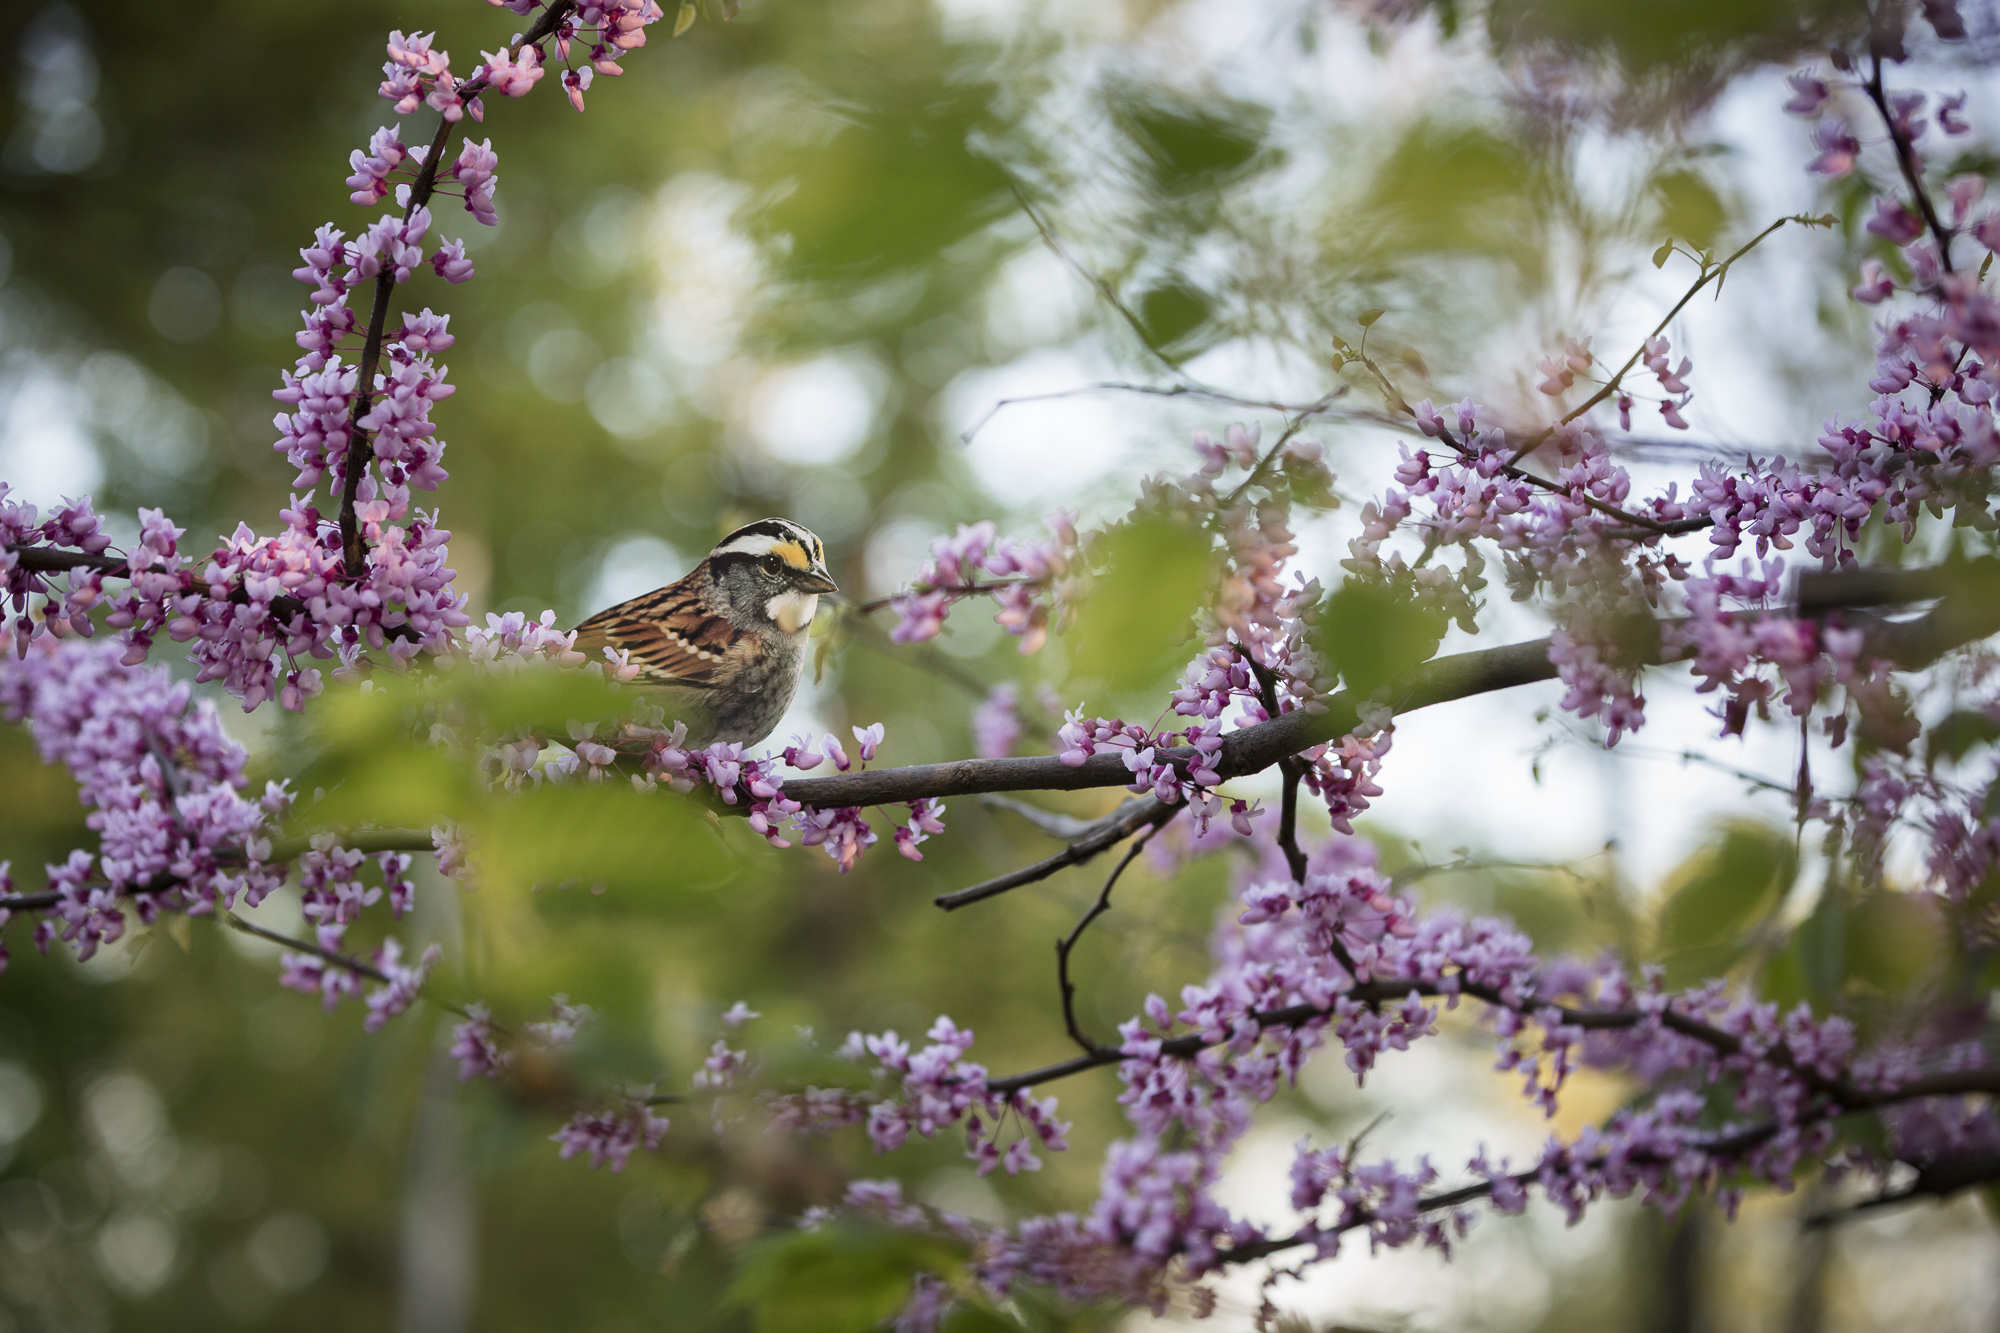 A paper cutout of a photograph of a White-throated Sparrow placed in a Redbud tree with pink blossoms and bright green leaves.